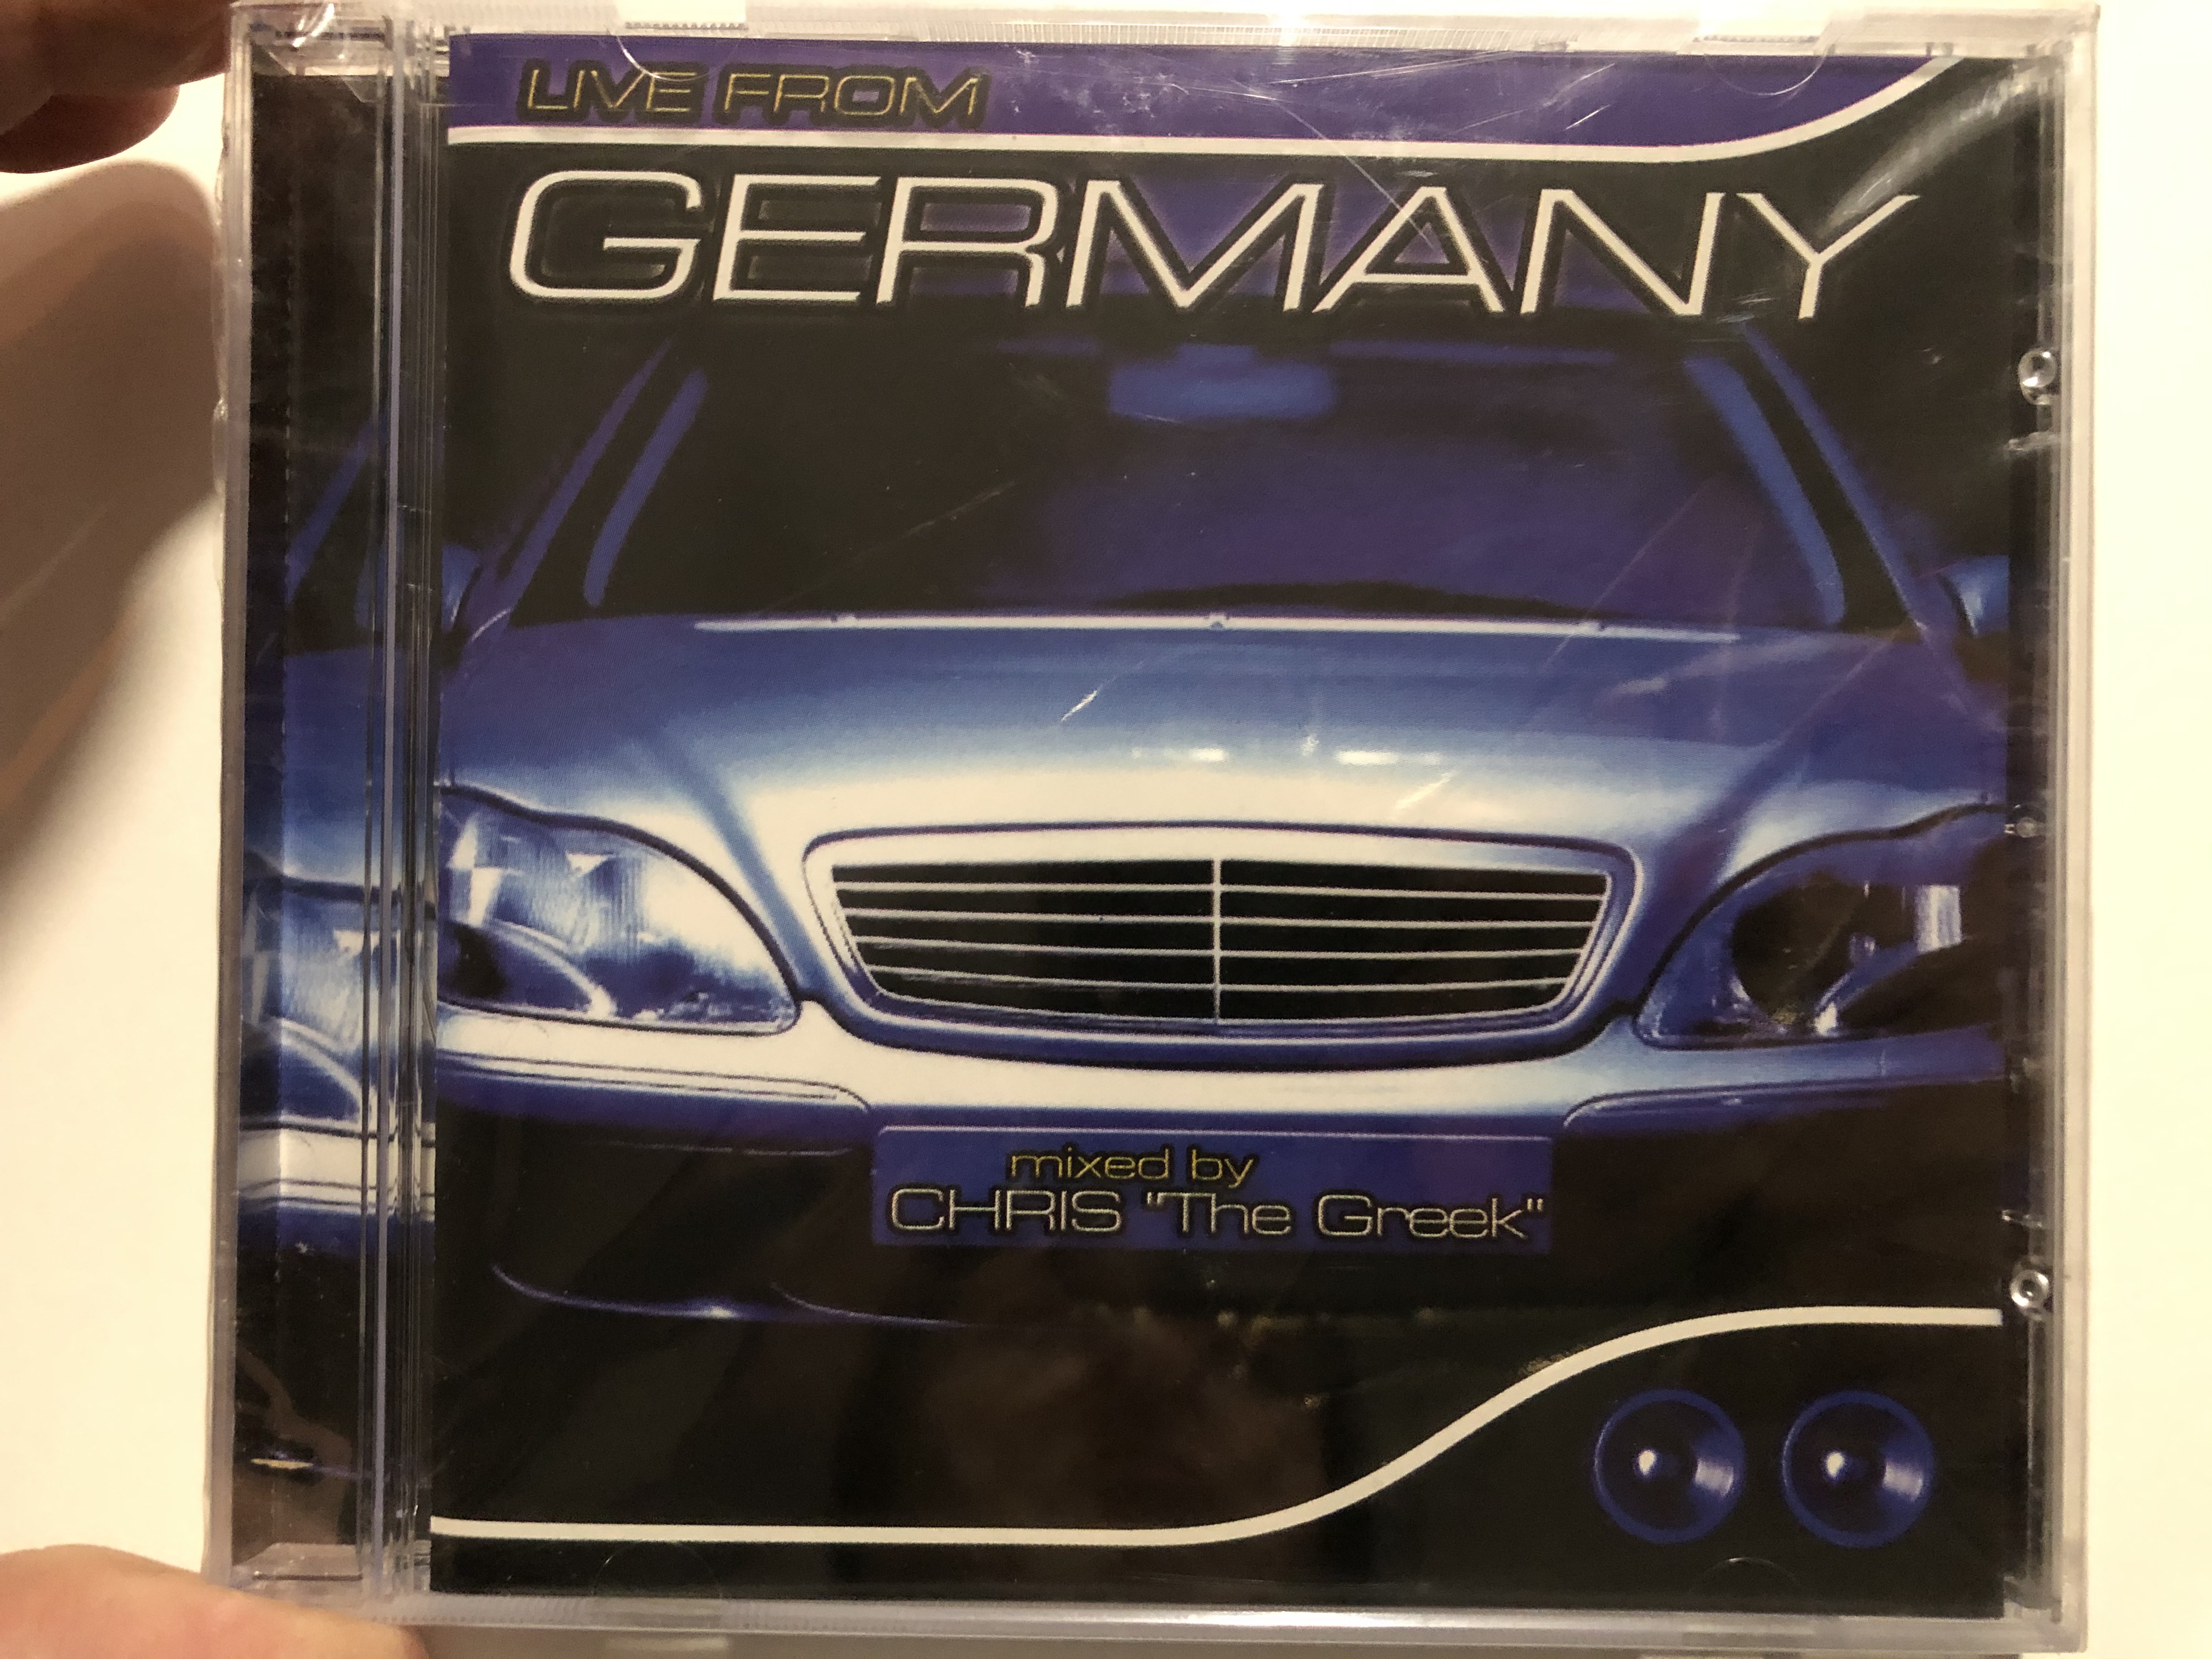 live-from-germany-mixed-by-chris-the-greek-zyx-music-audio-cd-2002-zyx-55285-2-1-.jpg